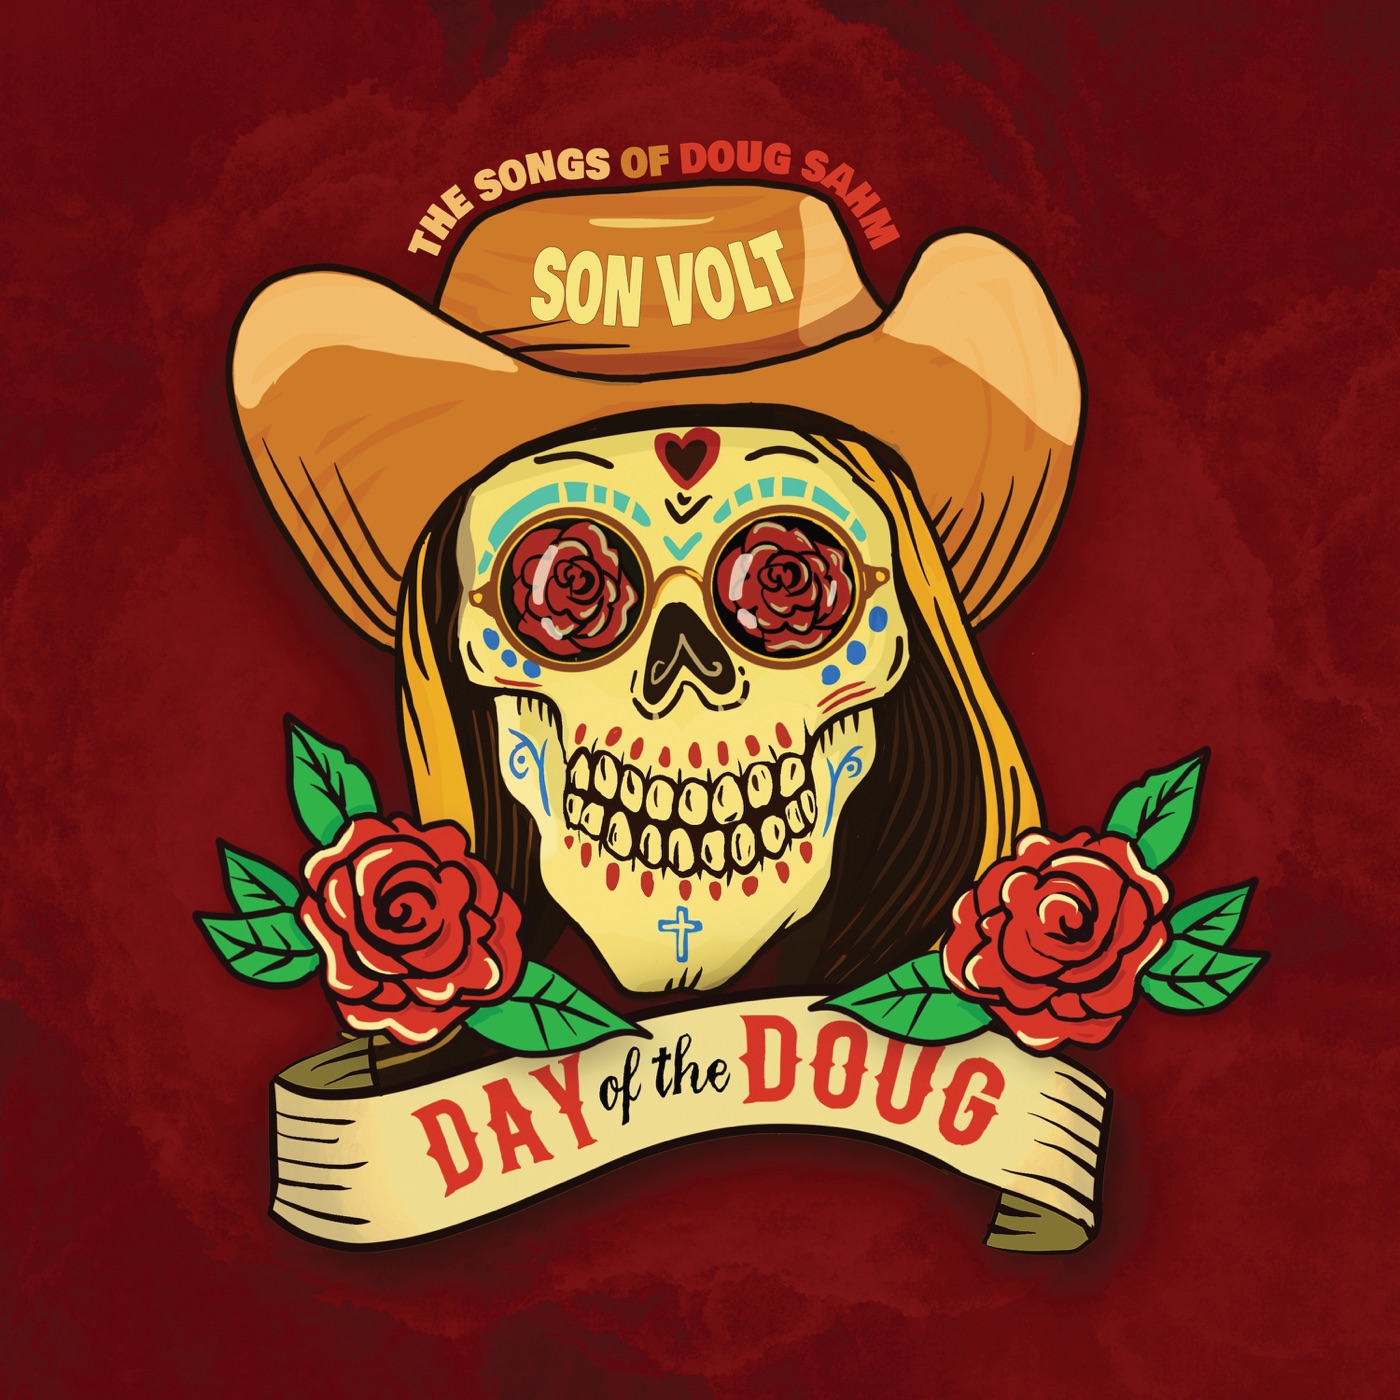 Day of the Doug by Son Volt